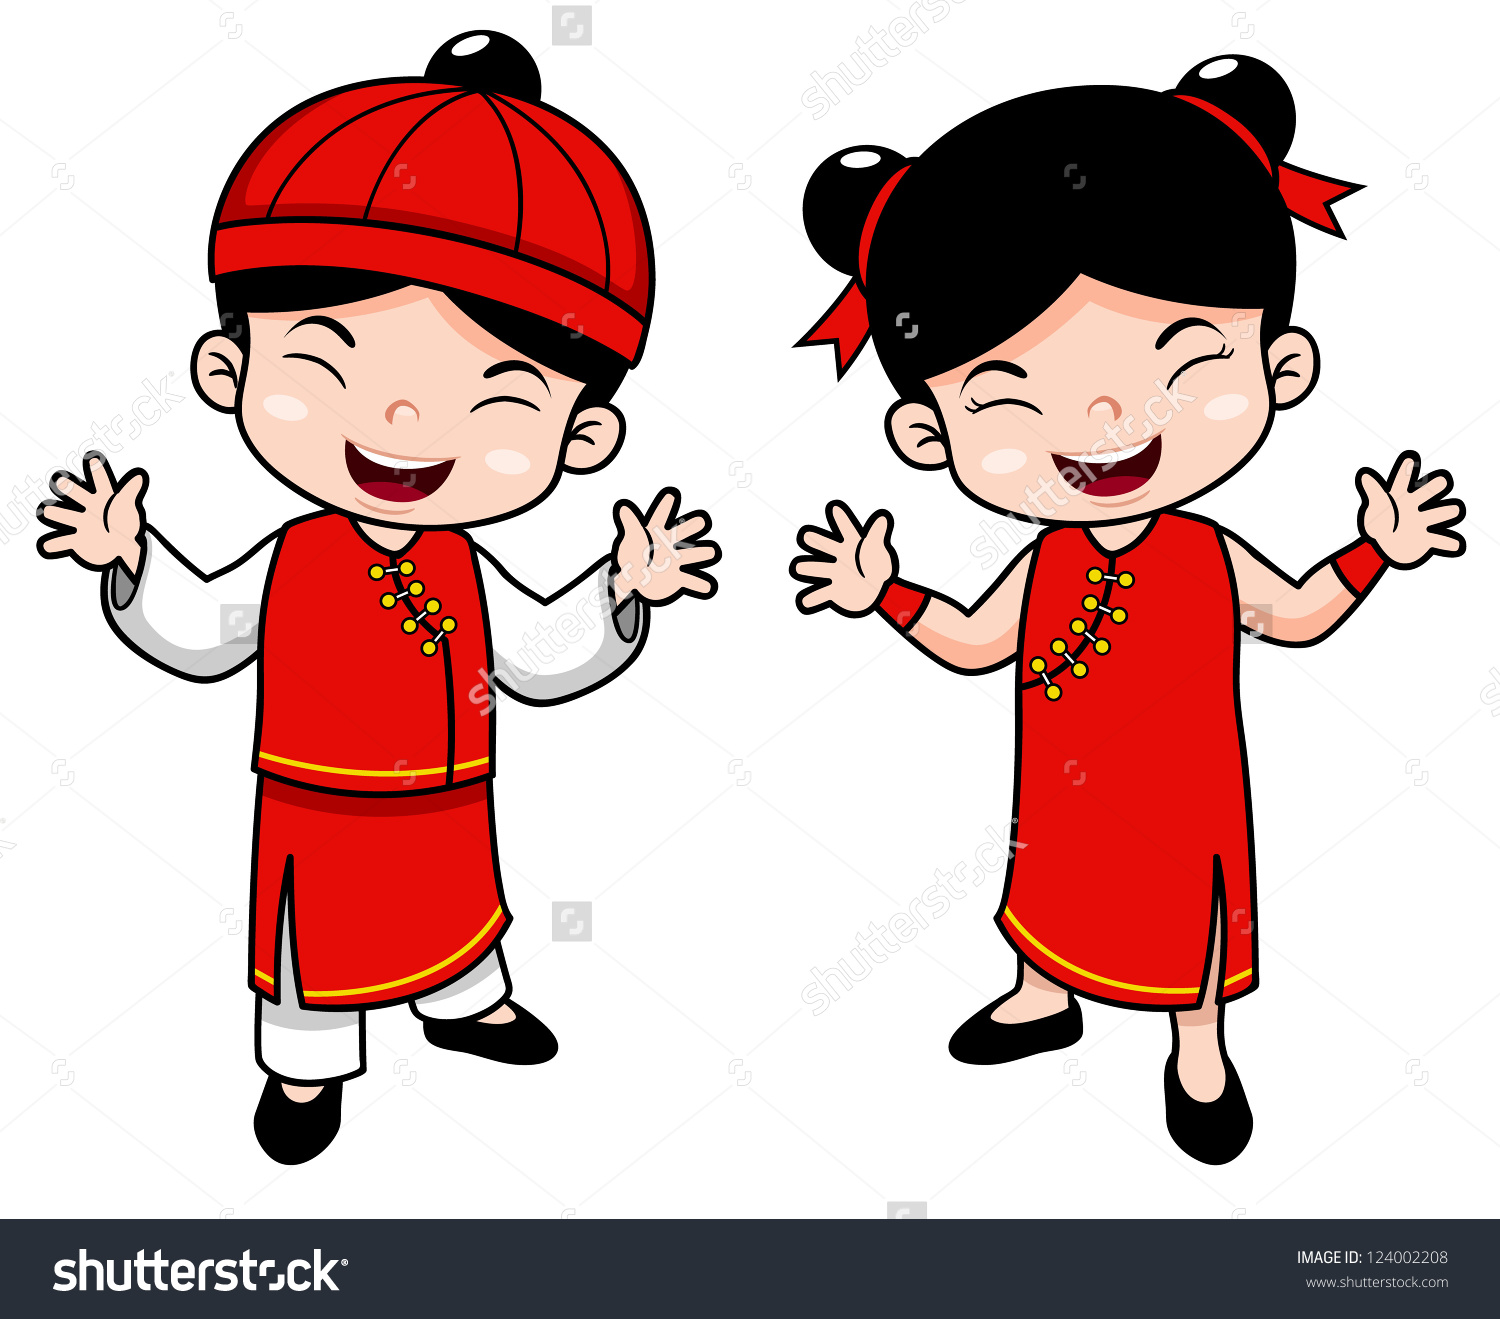 Station . Chinese clipart